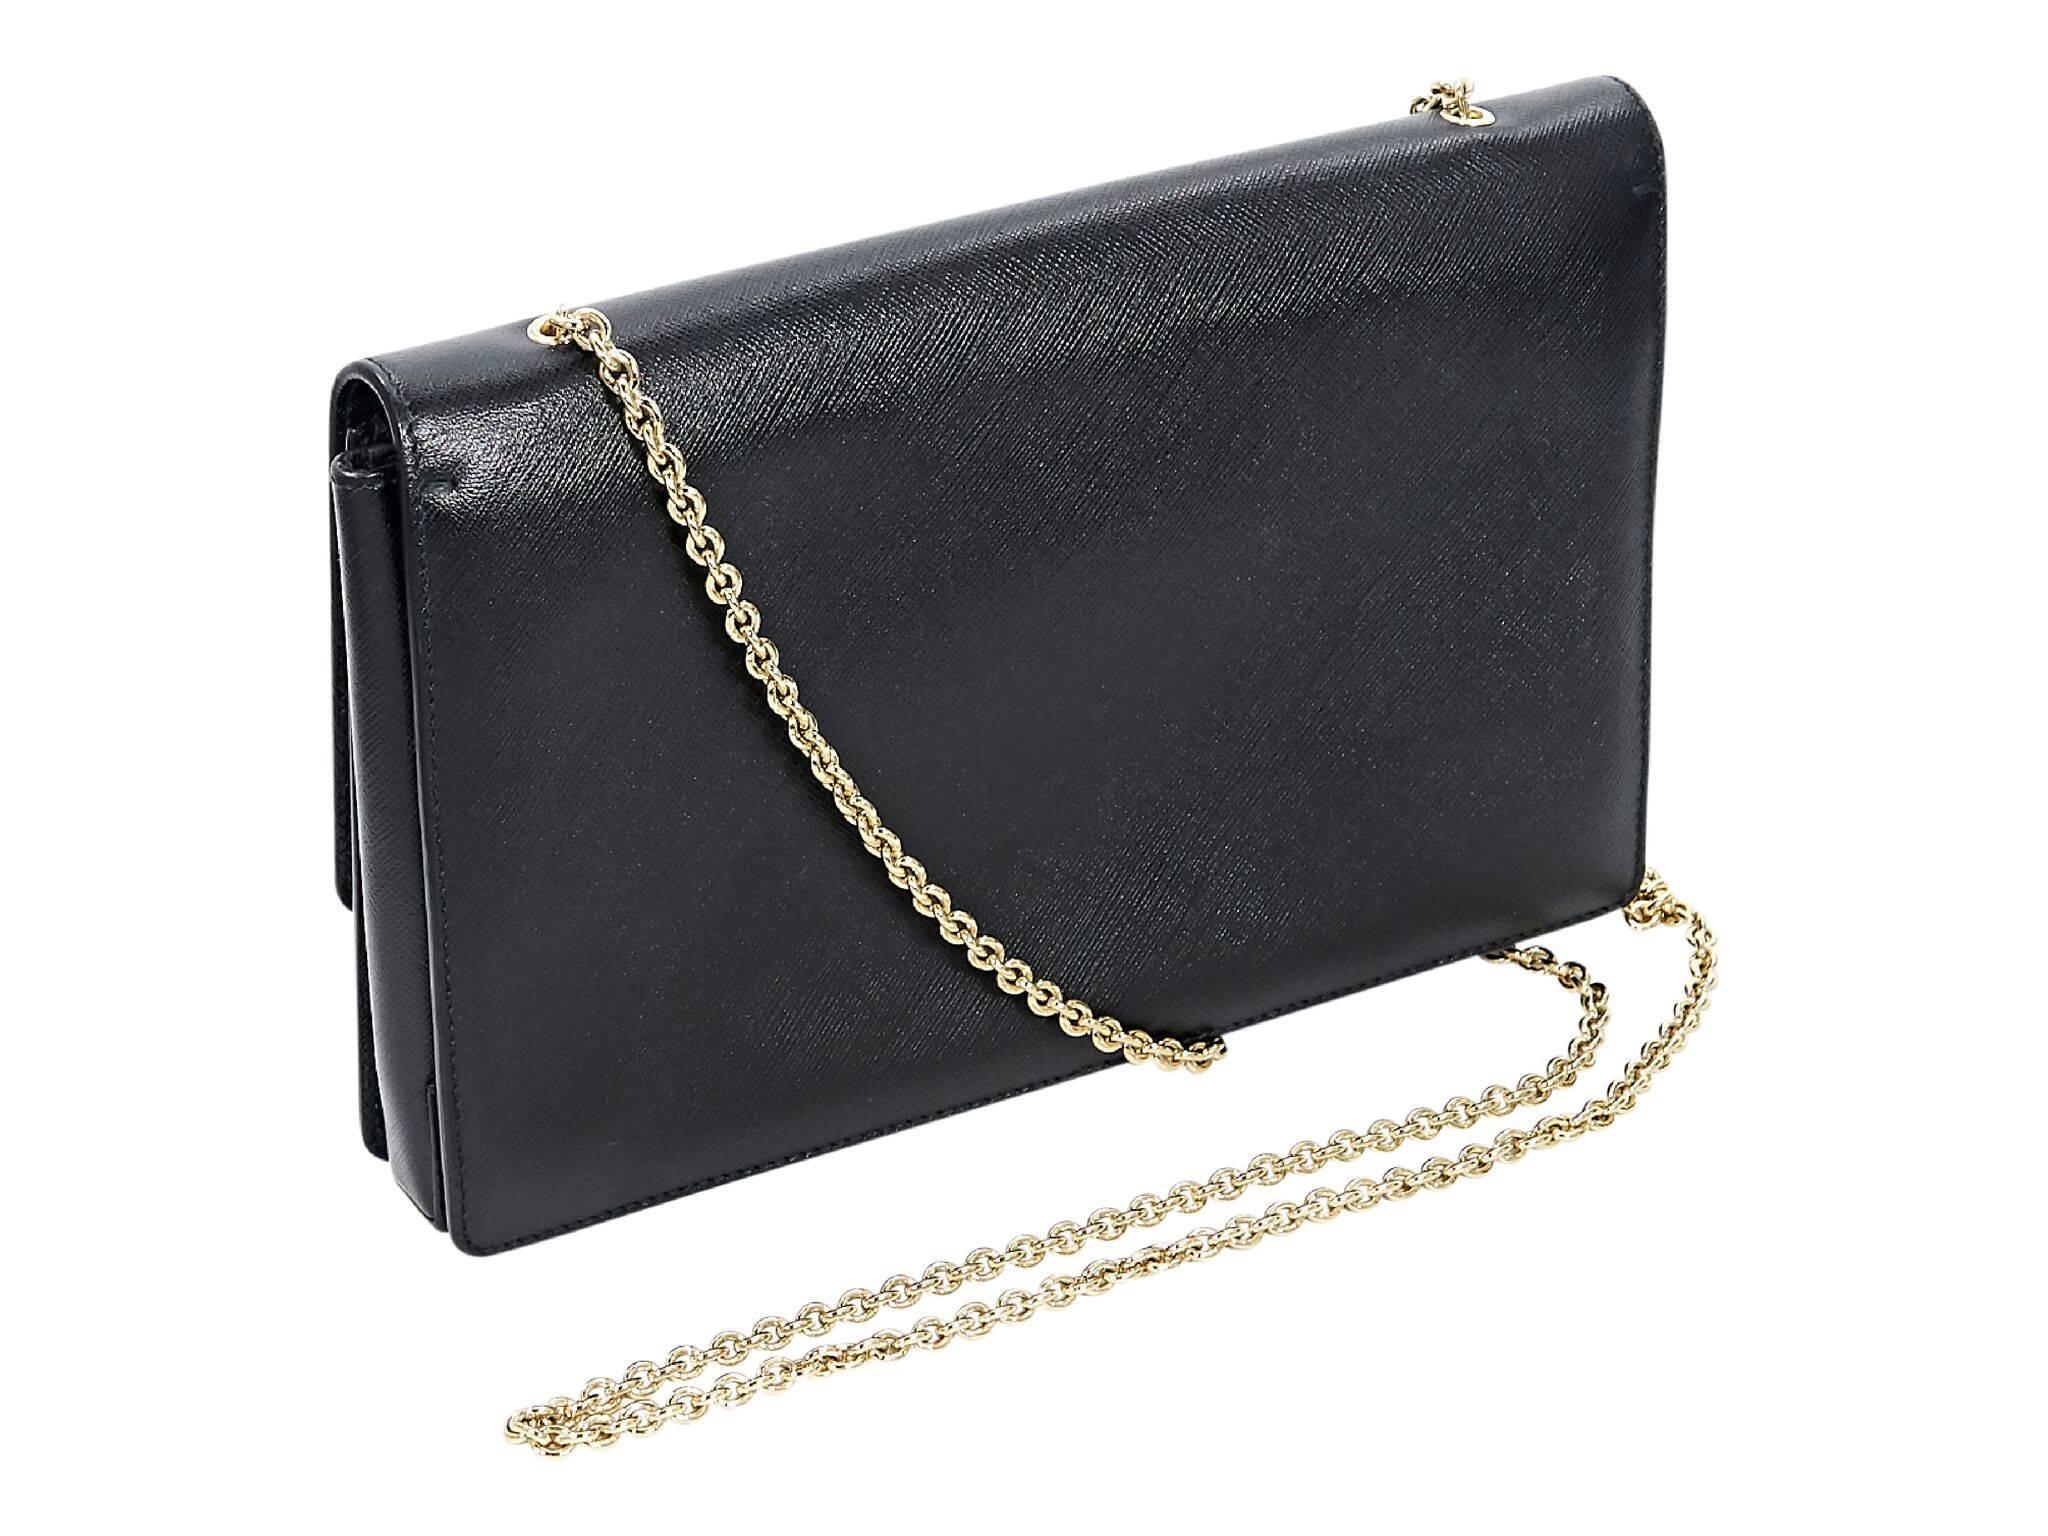 Product details:  Black saffiano leather Miss Vara crossbody bag by Salvatore Ferragamo.  Tuck-away chain crossbody strap.  Front flap with magnetic snap closure.  Lined interior with inner zip pocket.  Goldtone hardware.  Dust bag included.  10